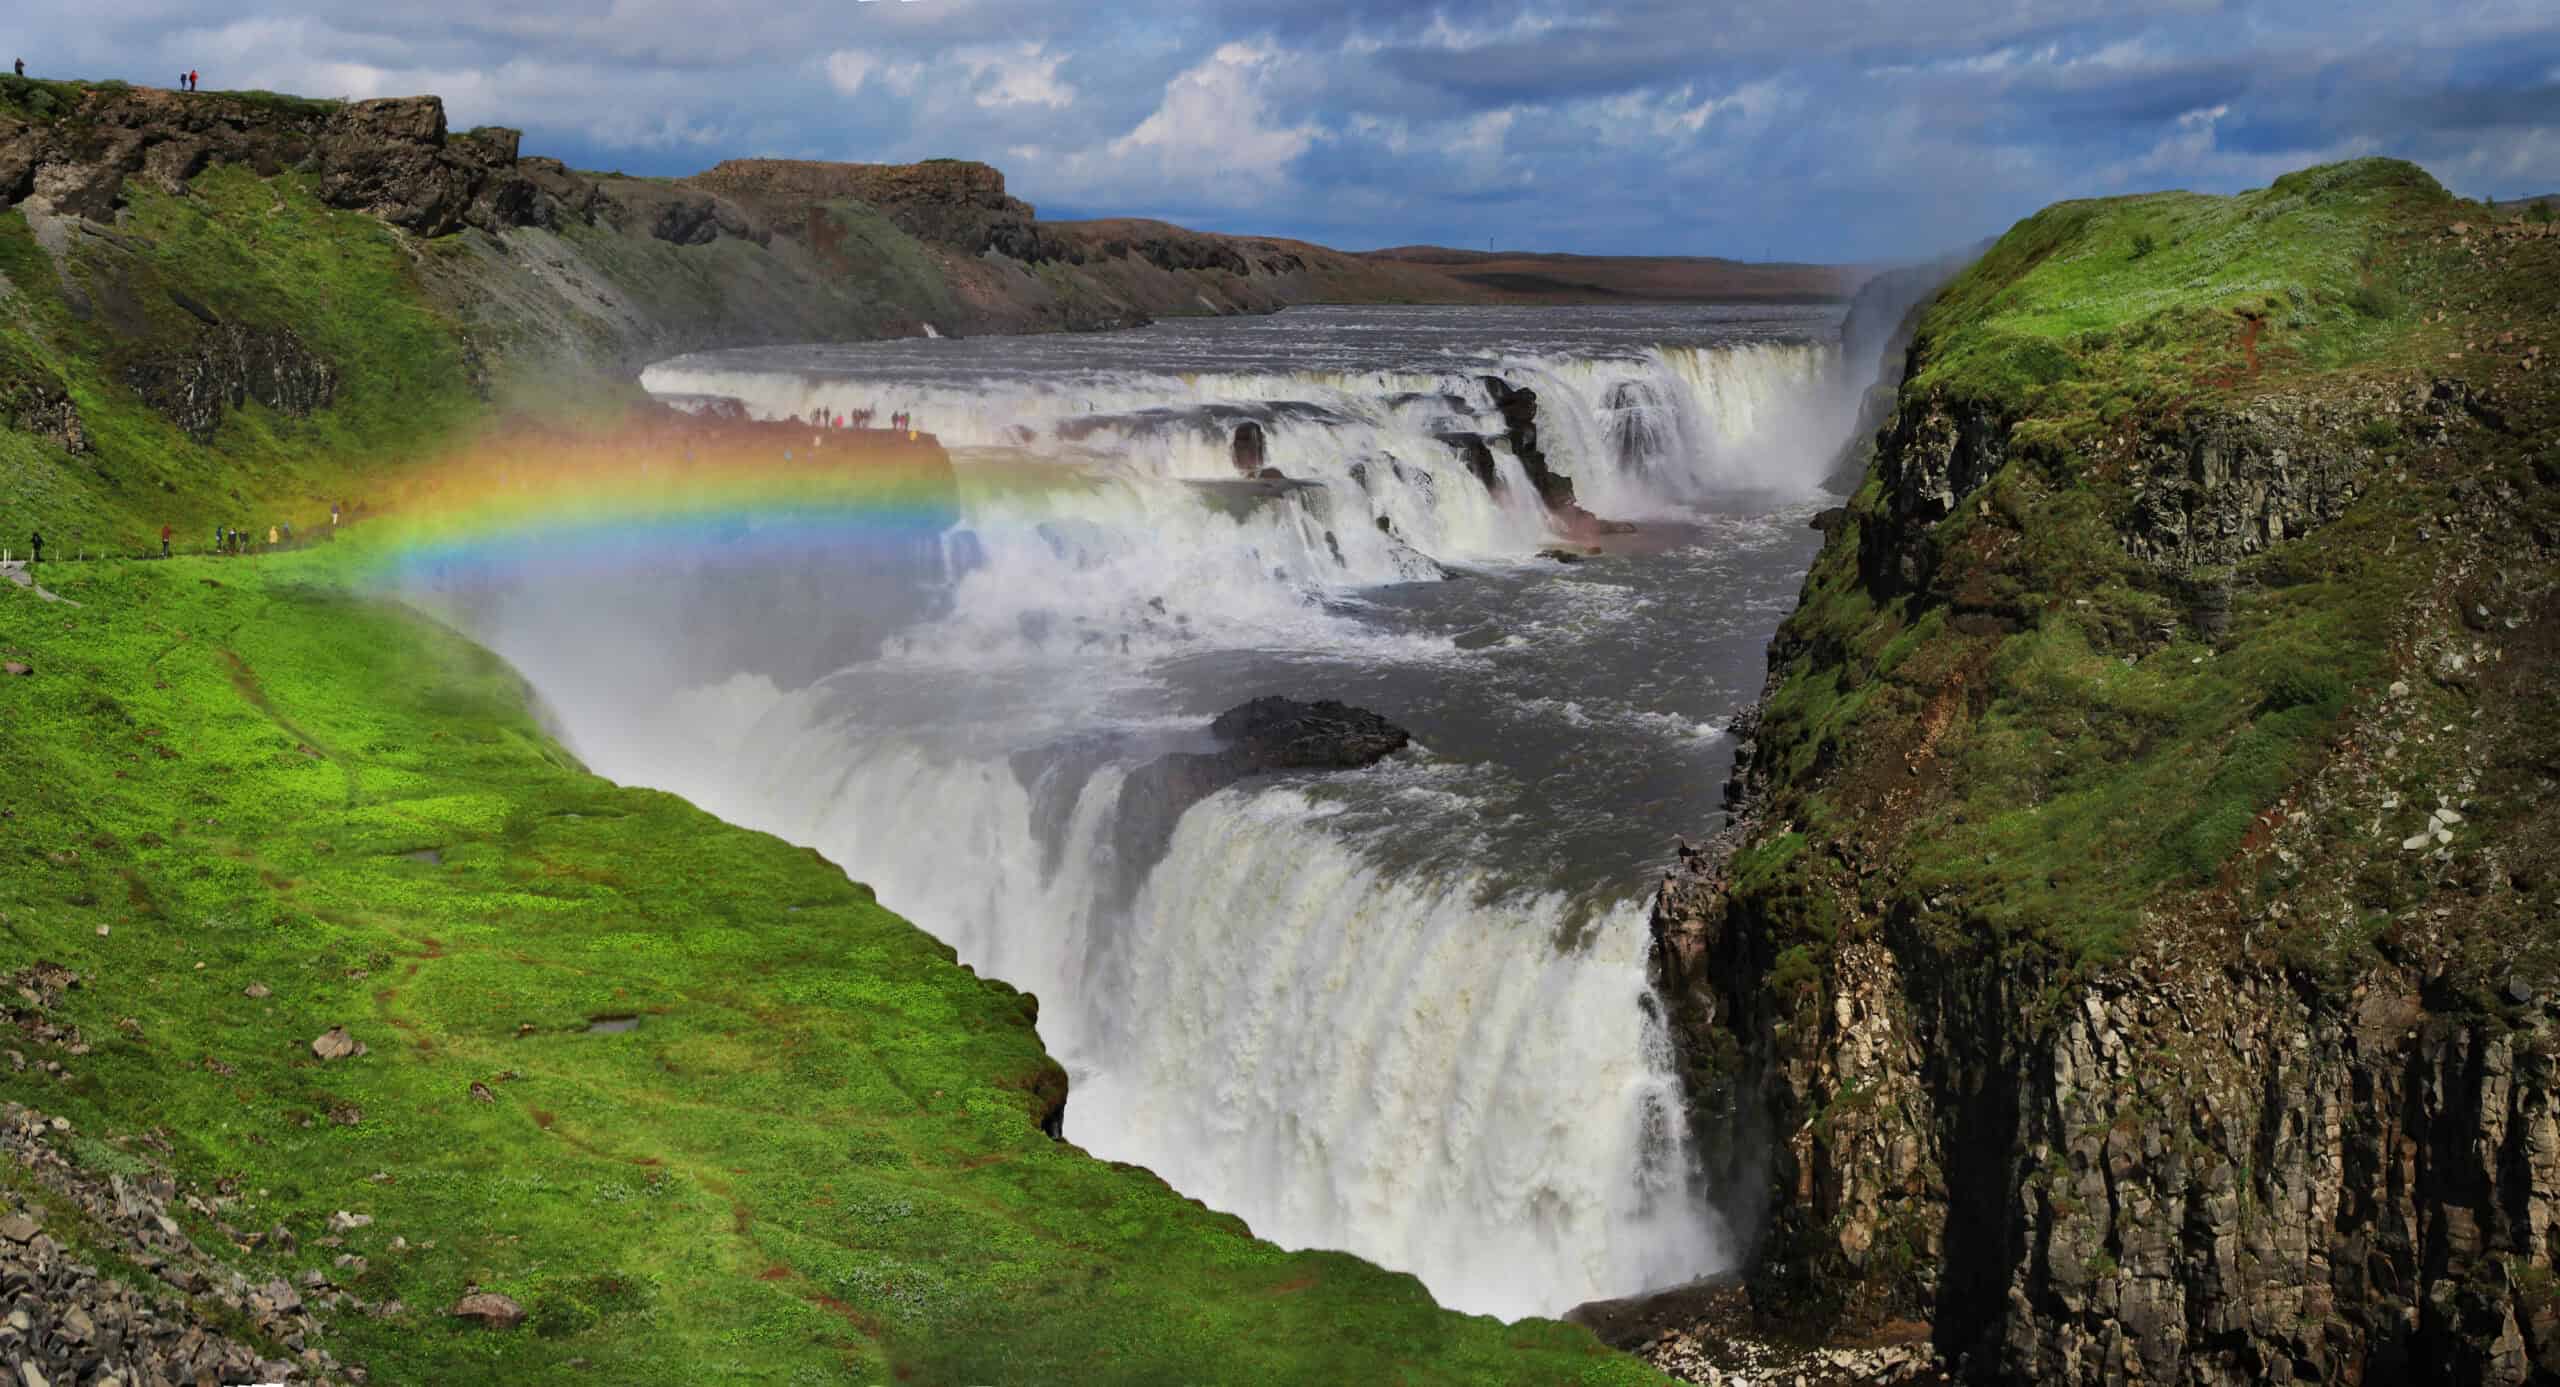 <p>Located within Iceland’s famed Golden Circle, Gullfoss is one of the country’s most powerful and enthralling waterfalls. This iconic natural wonder features a dramatic double cascade, with water plunging 36 feet in the upper tier and 69 feet in the lower tier into a rugged canyon. </p> <p>The golden hue that often appears in its waters, especially on sunny days, and the frequent rainbows created by the mist, make Gullfoss a breathtaking sight. Fed by the Hvítá River from the Langjökull glacier, the falls are easily accessible and offer several viewpoints for visitors to marvel at its awe-inspiring beauty.</p>